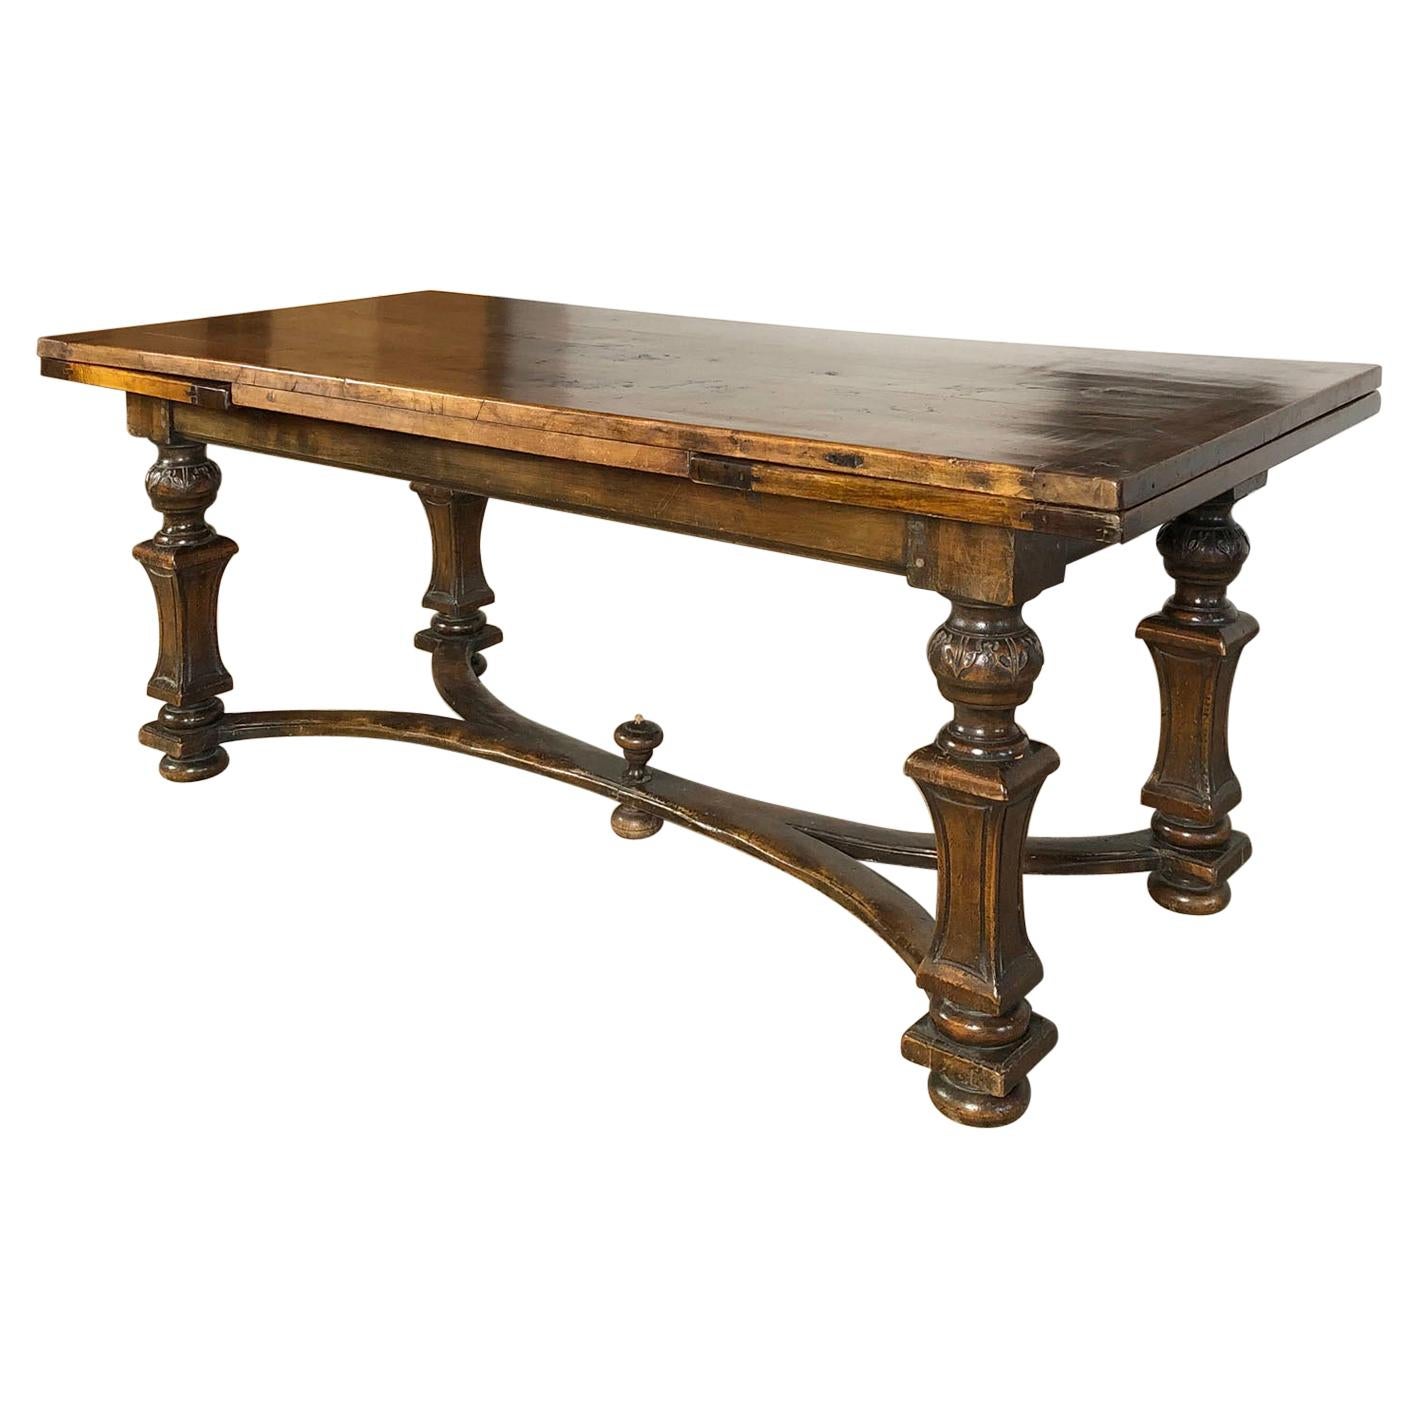 Early 18th Century Swiss / Italian Baroque Walnut Extension Dining Table